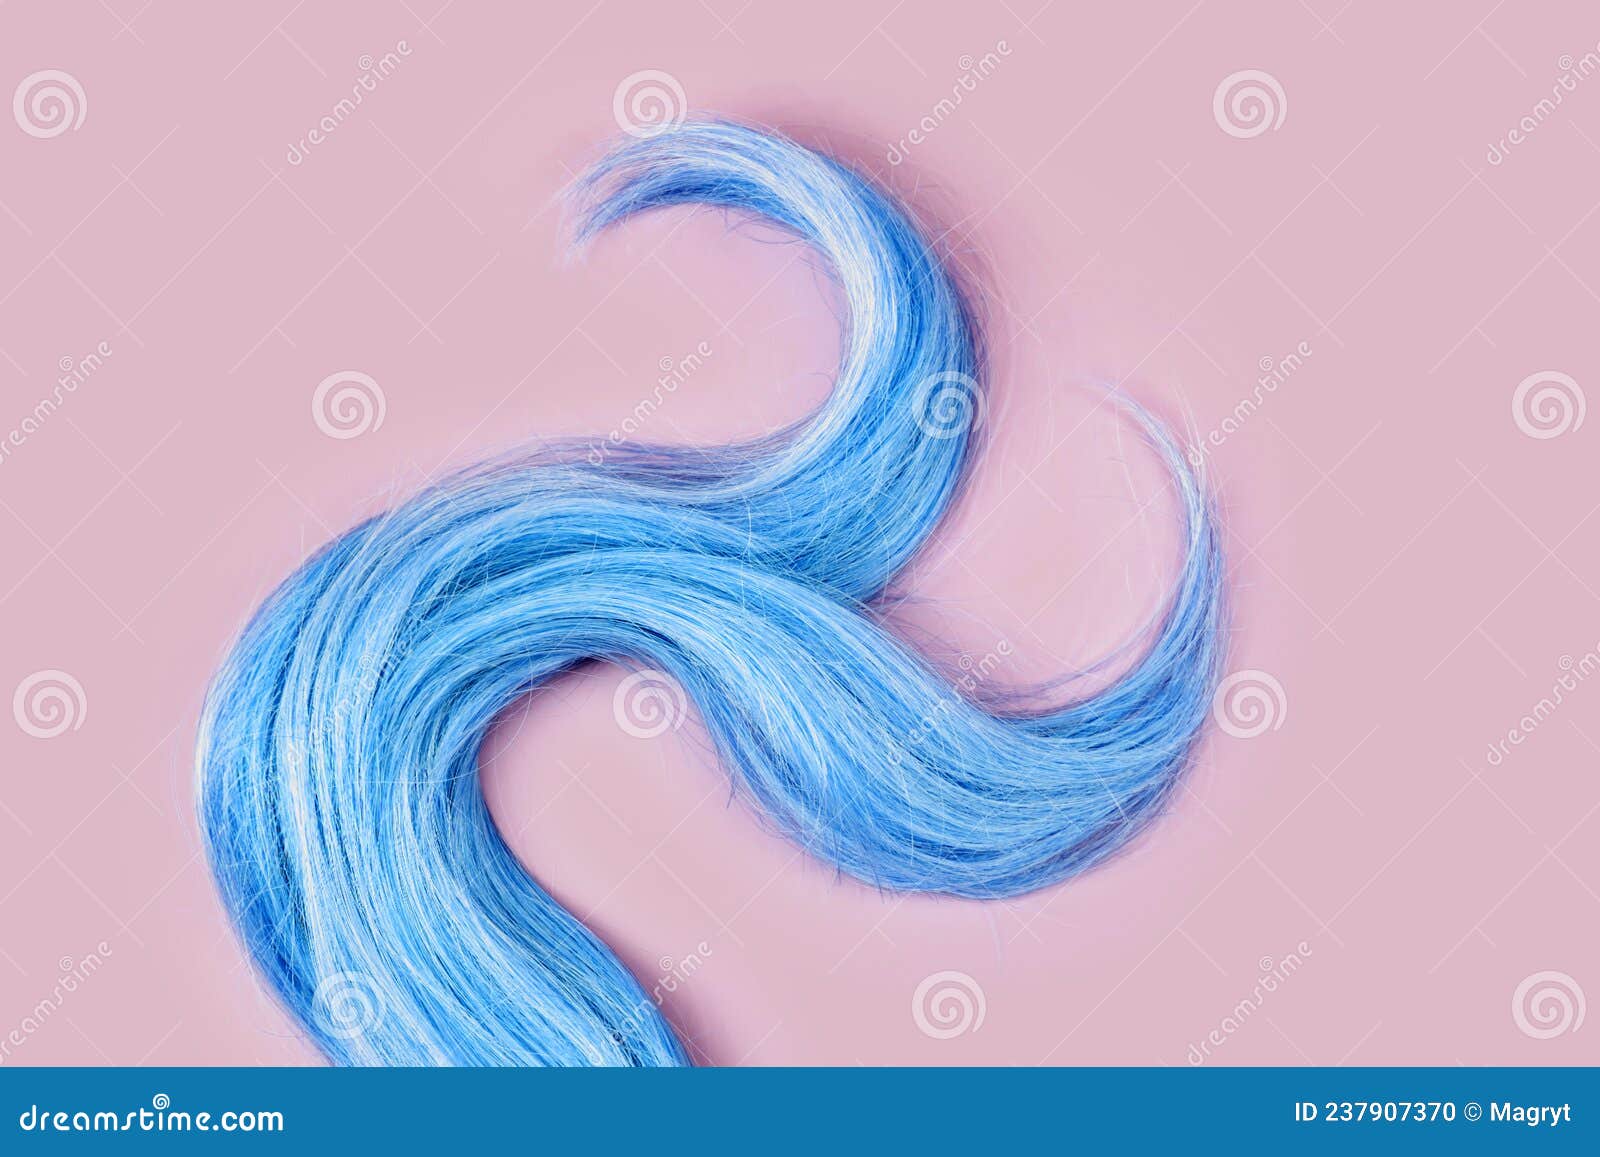 6. Curly Blue Drag Hair Accessories - wide 1